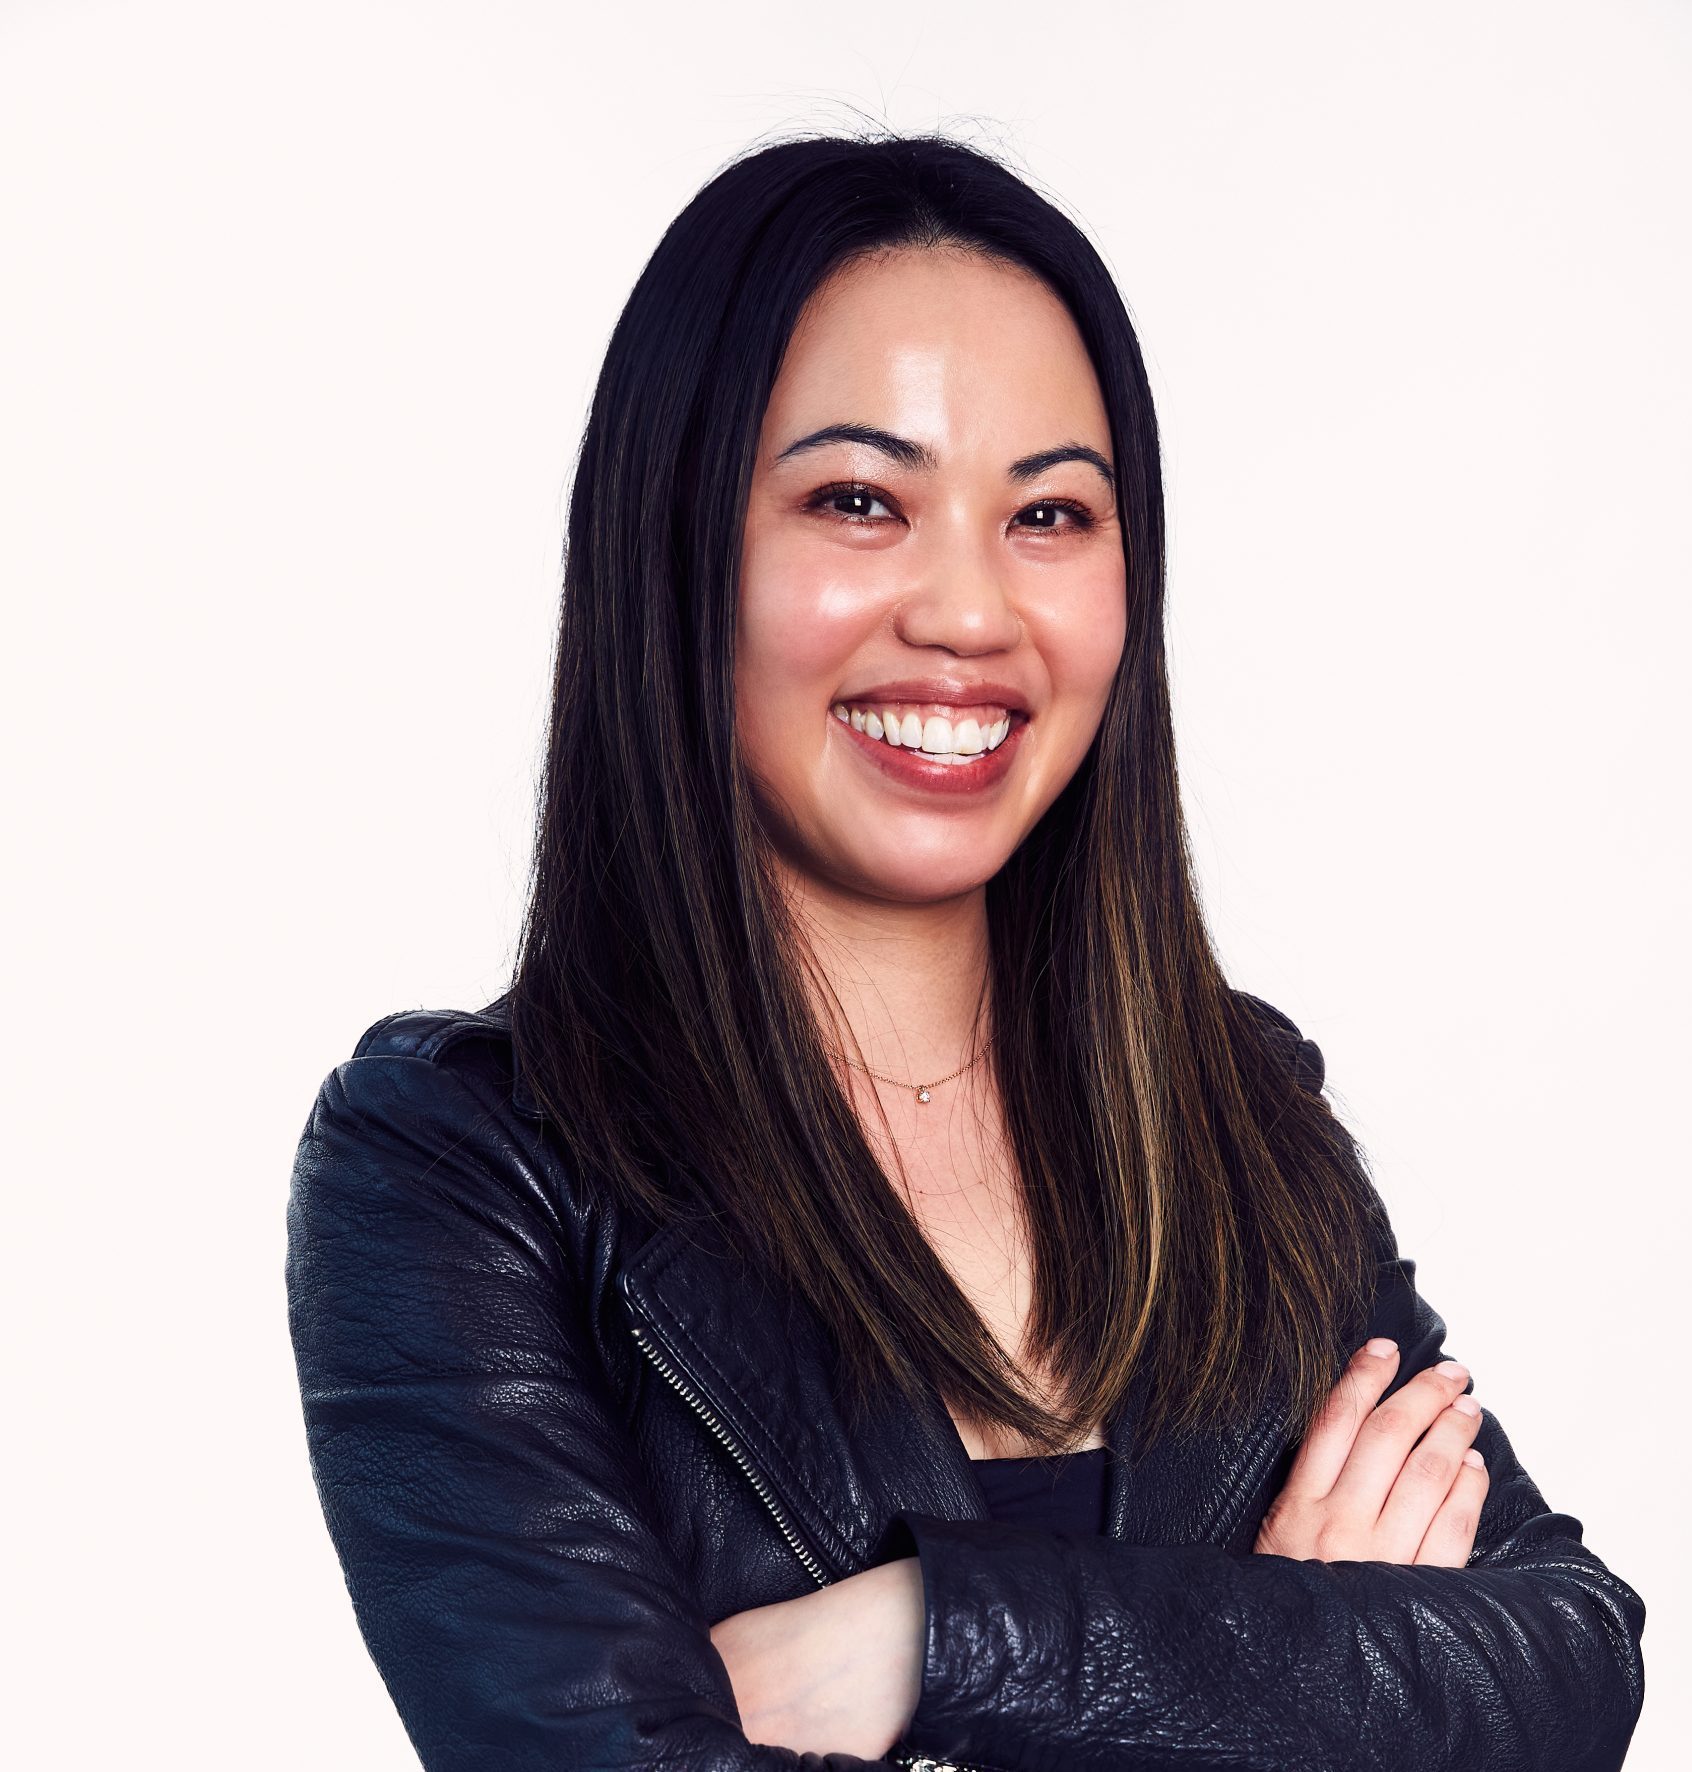 Five minutes with Lisa Pham